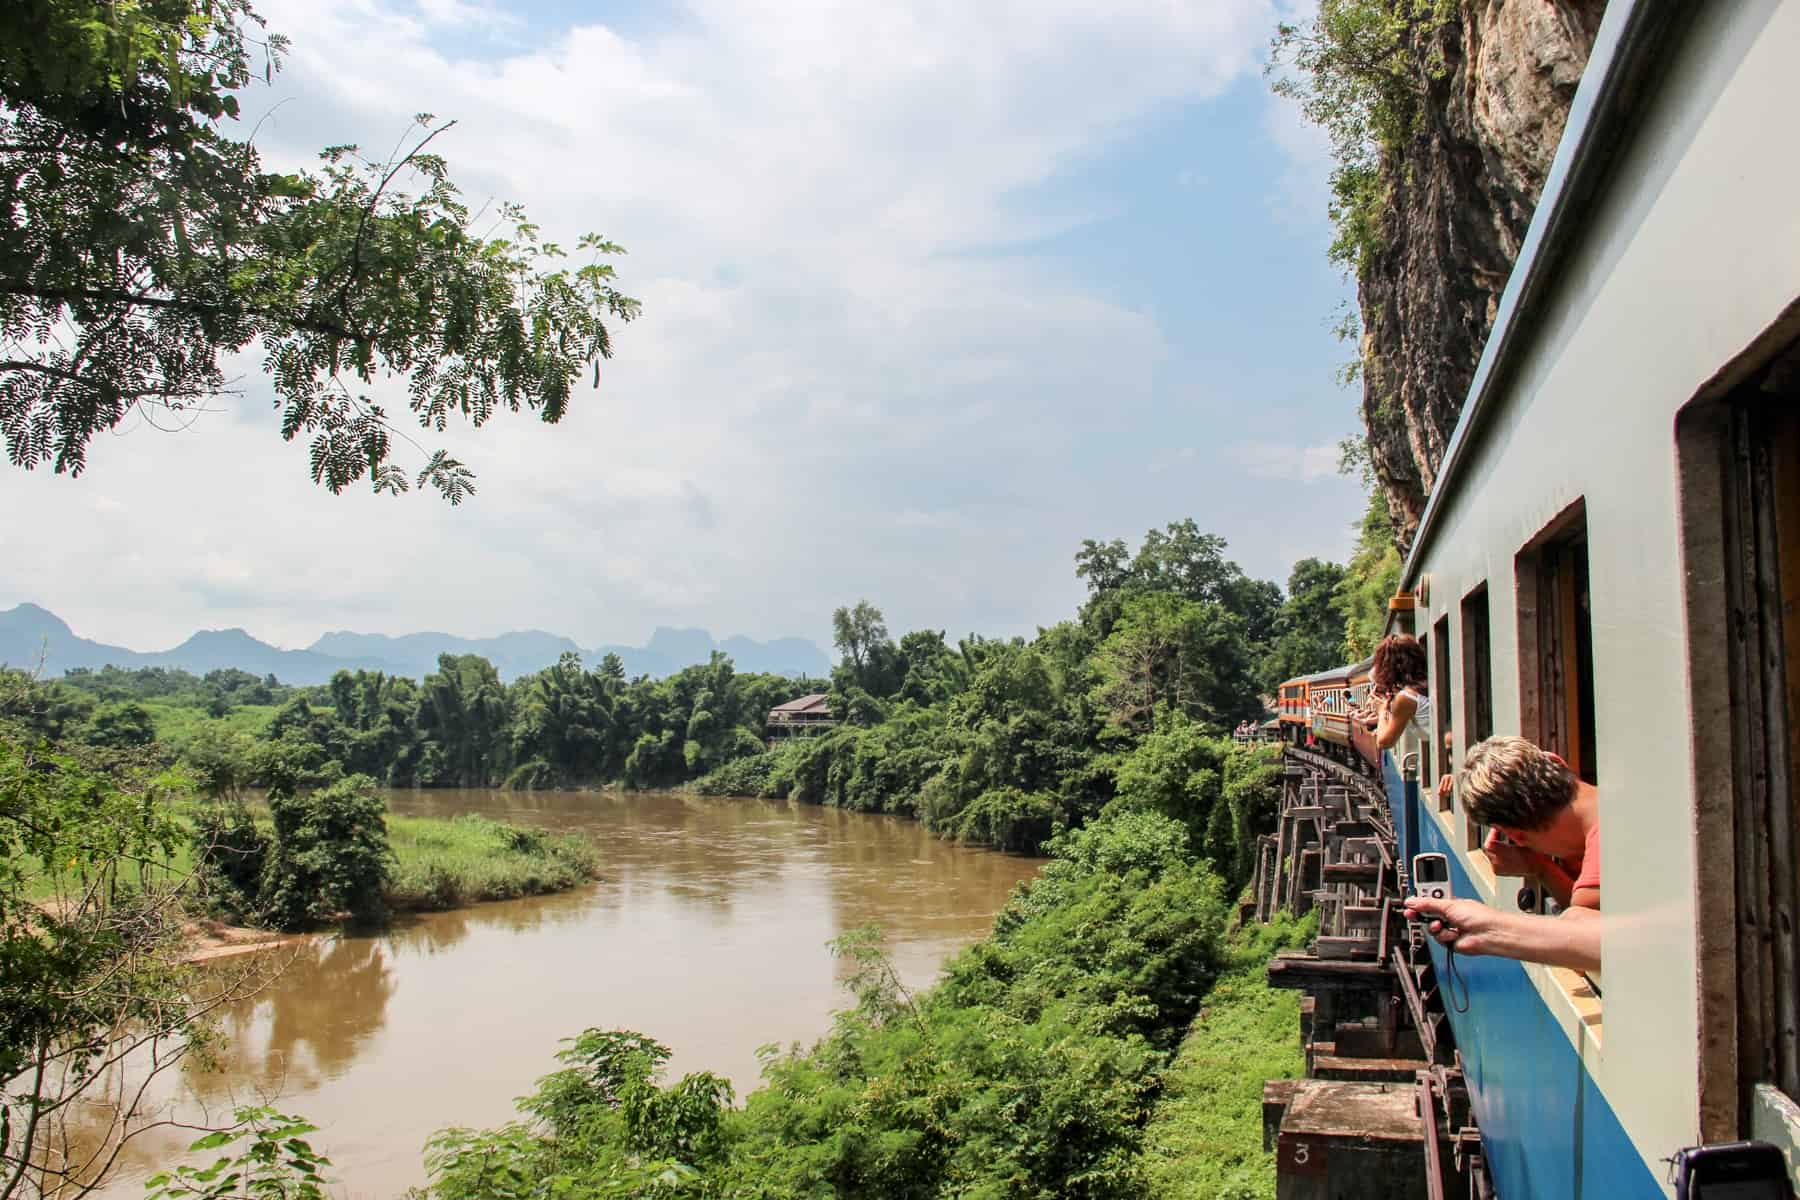 People lean out of a blue and white train - the Death Railway in Kanchanaburi – as it curves past a jungle green river bank